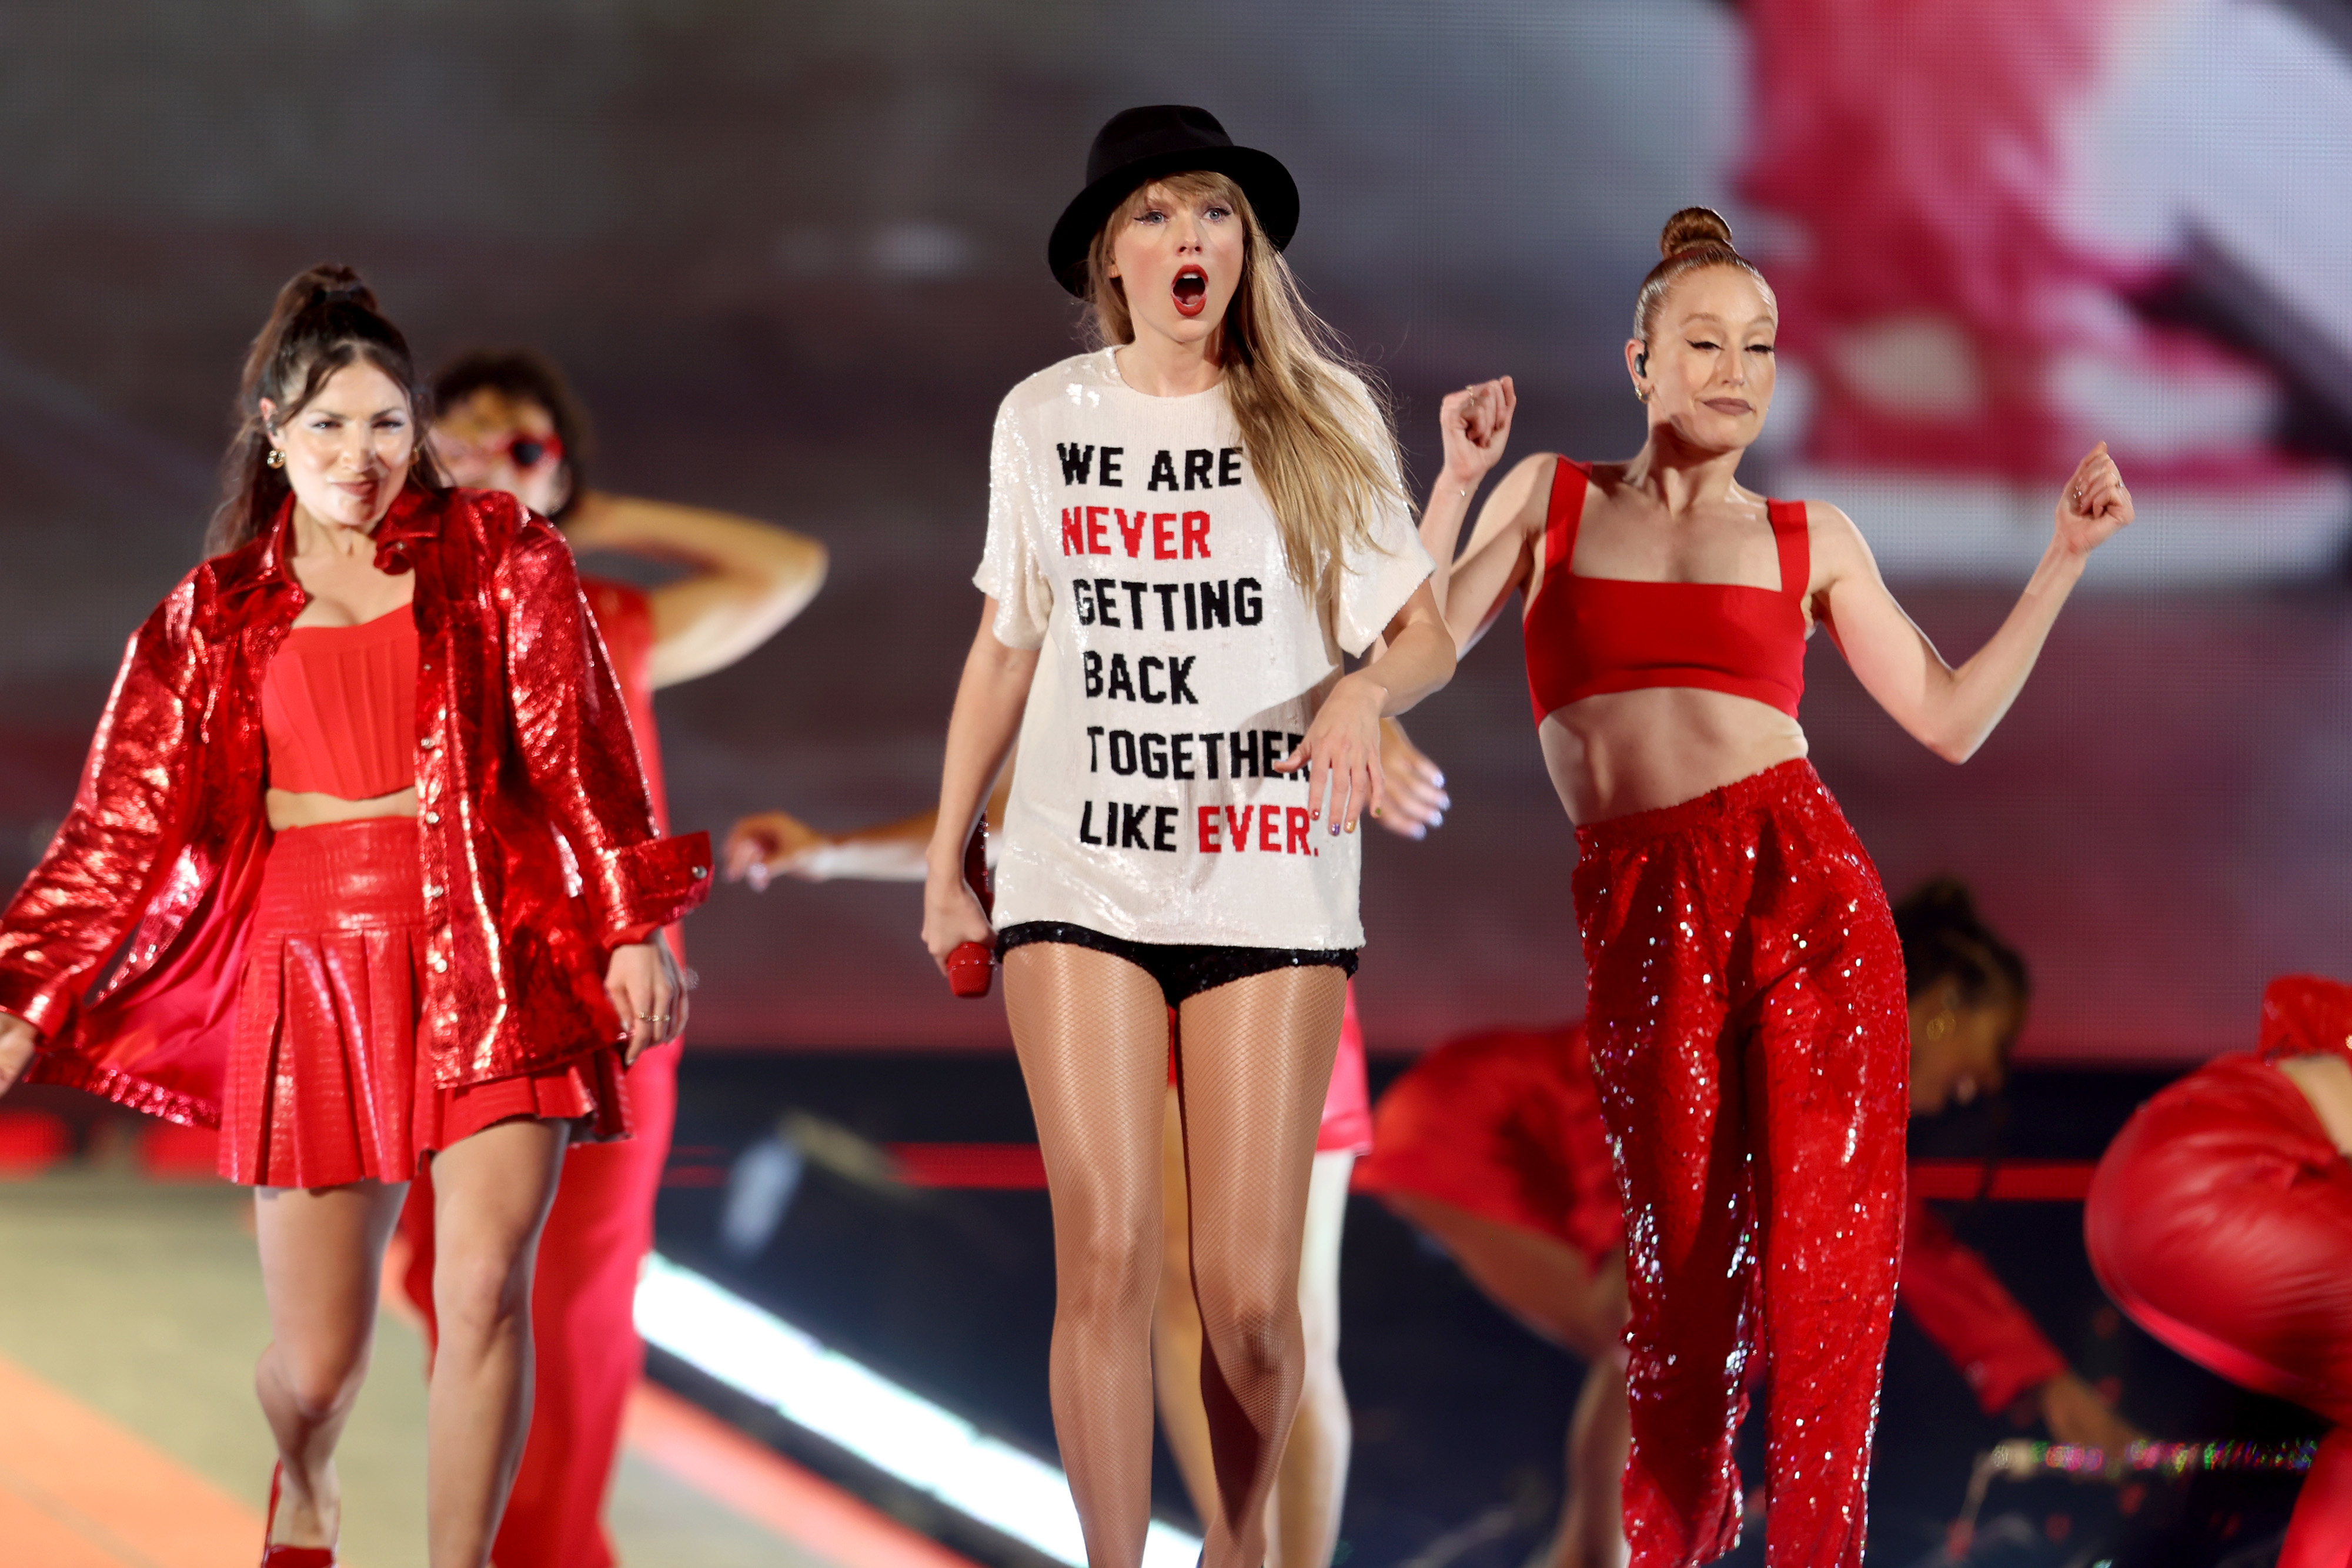 Close-up of Taylor performing with dancers and wearing a &quot;We are never getting back together like ever&quot; T-shirt